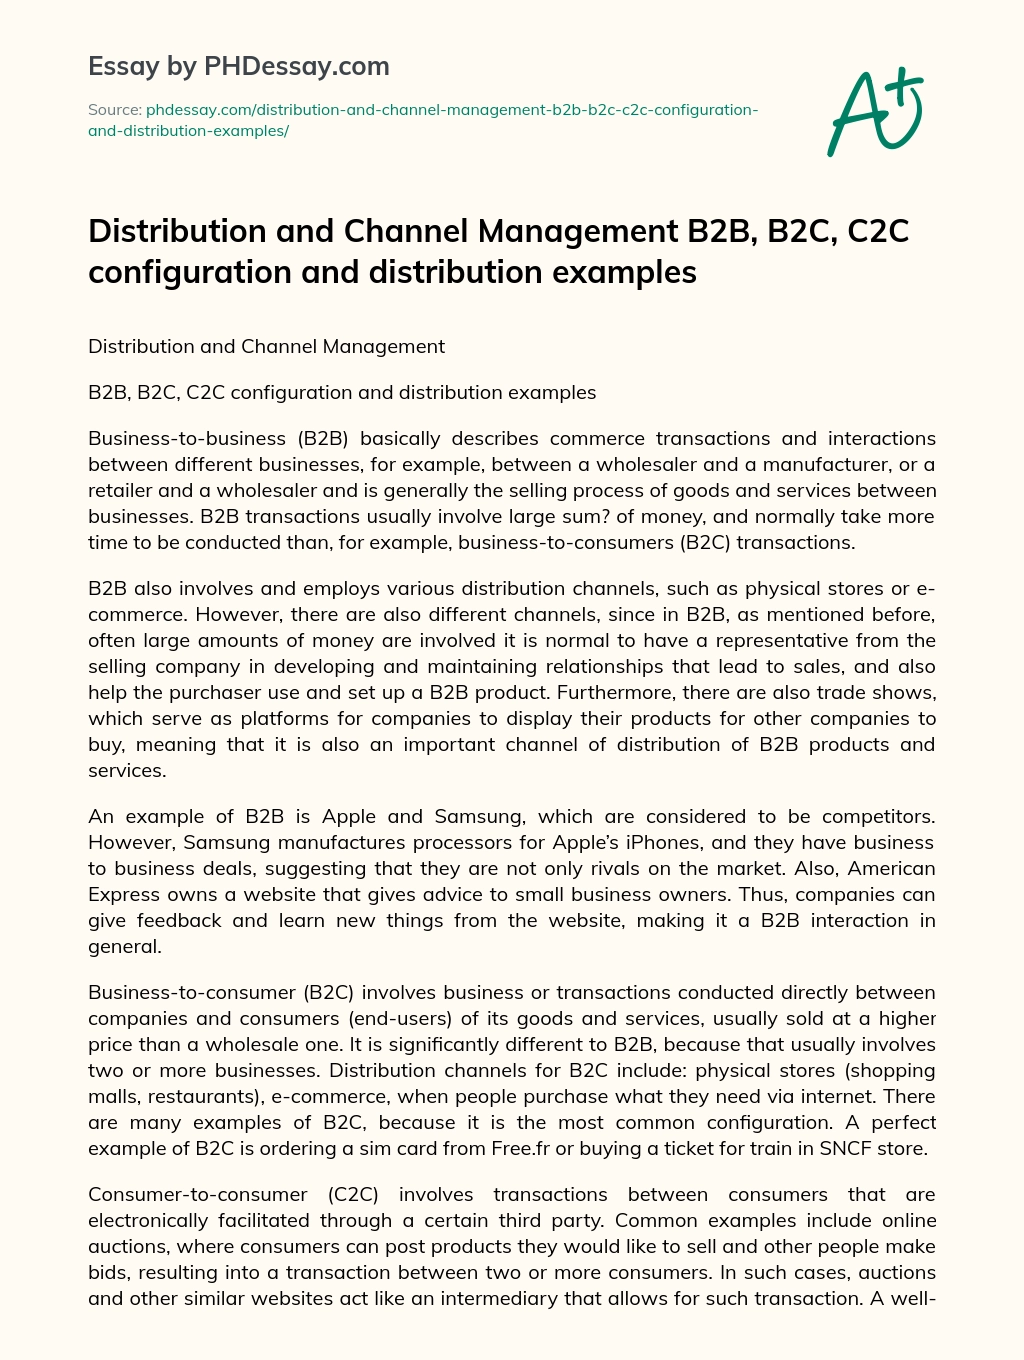 Distribution and Channel Management   B2B, B2C, C2C configuration and distribution examples essay